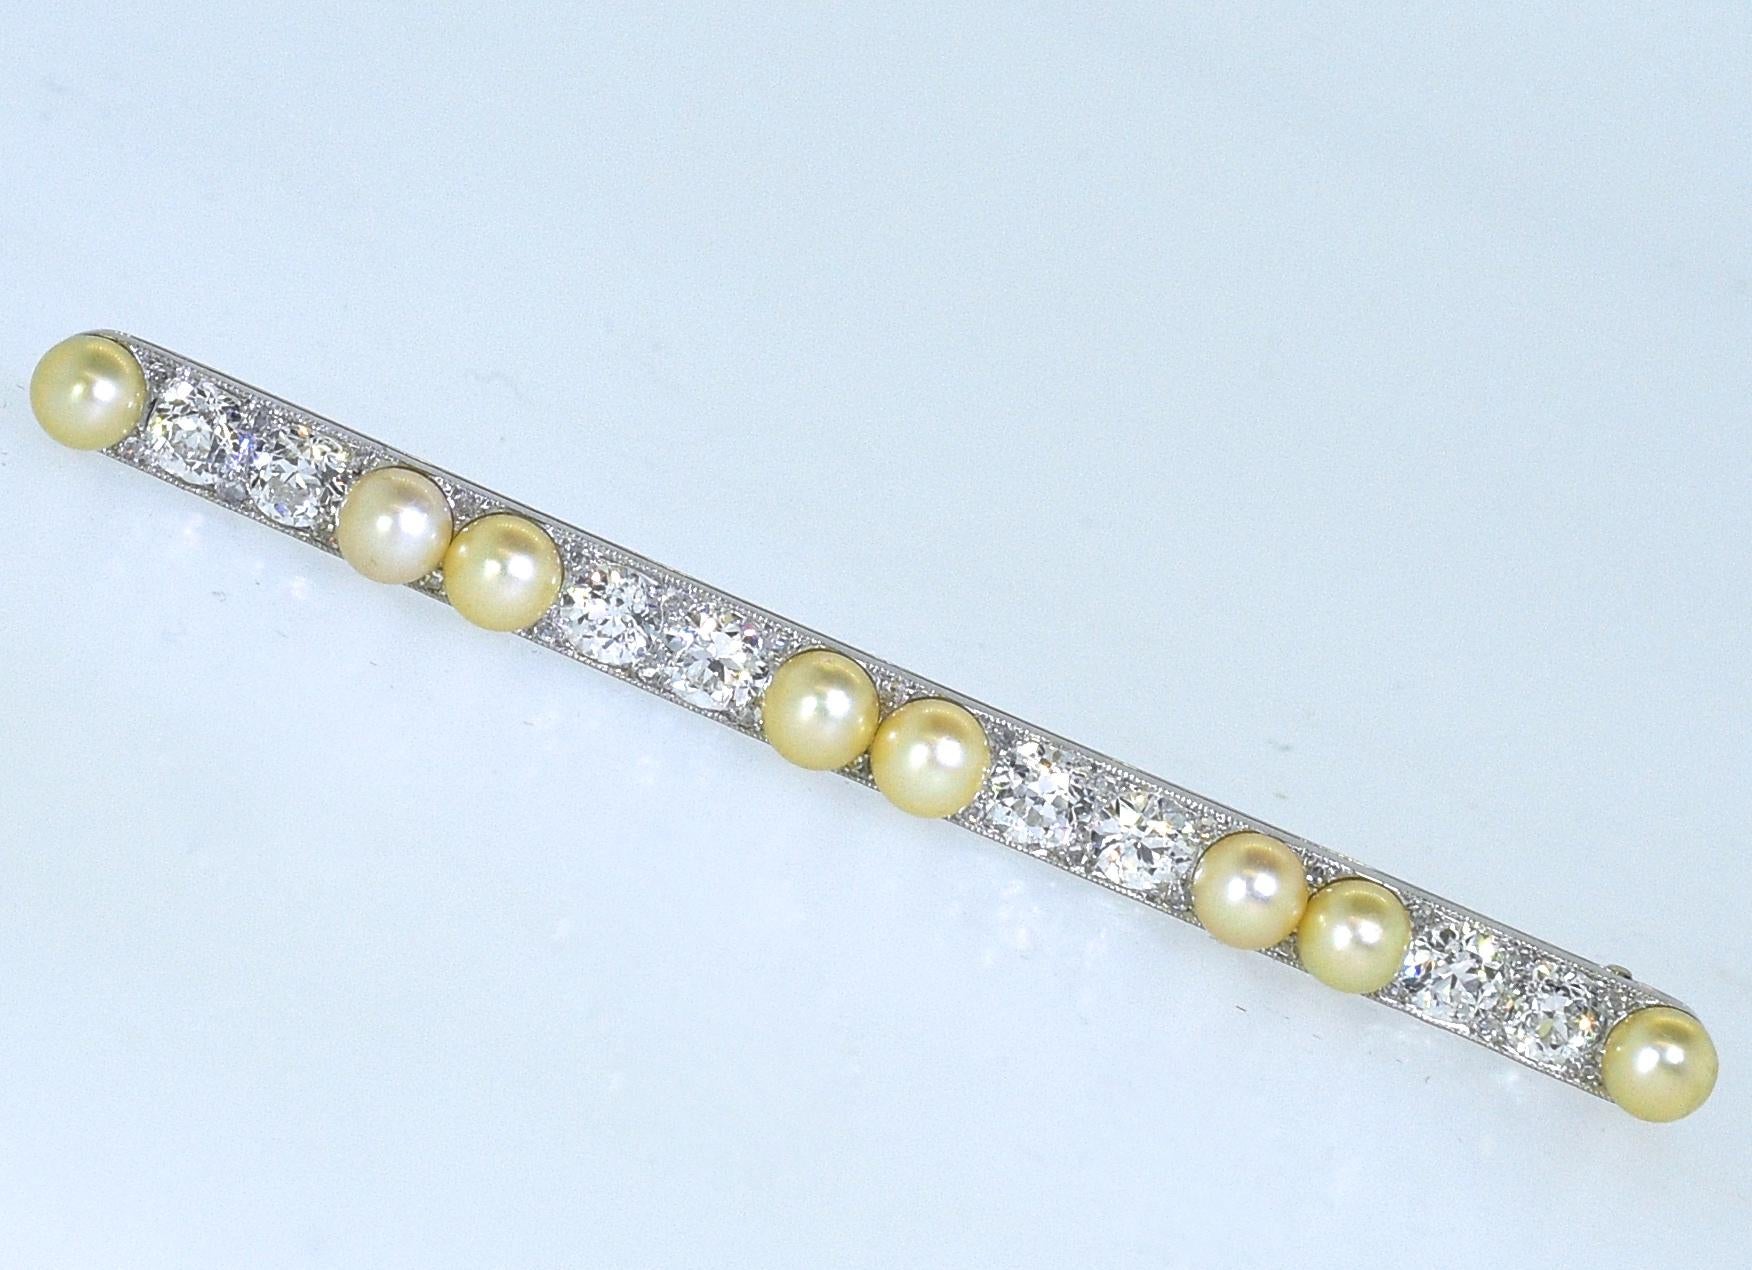 Cartier pin with 8 natural oriental pearls surrounded by 28  rose cut diamonds and centering 8 early mine cut diamonds amounting to 2.00 cts.  This platinum piece is signed on the verso Cartier.  This piece is three inches long, well made, and in